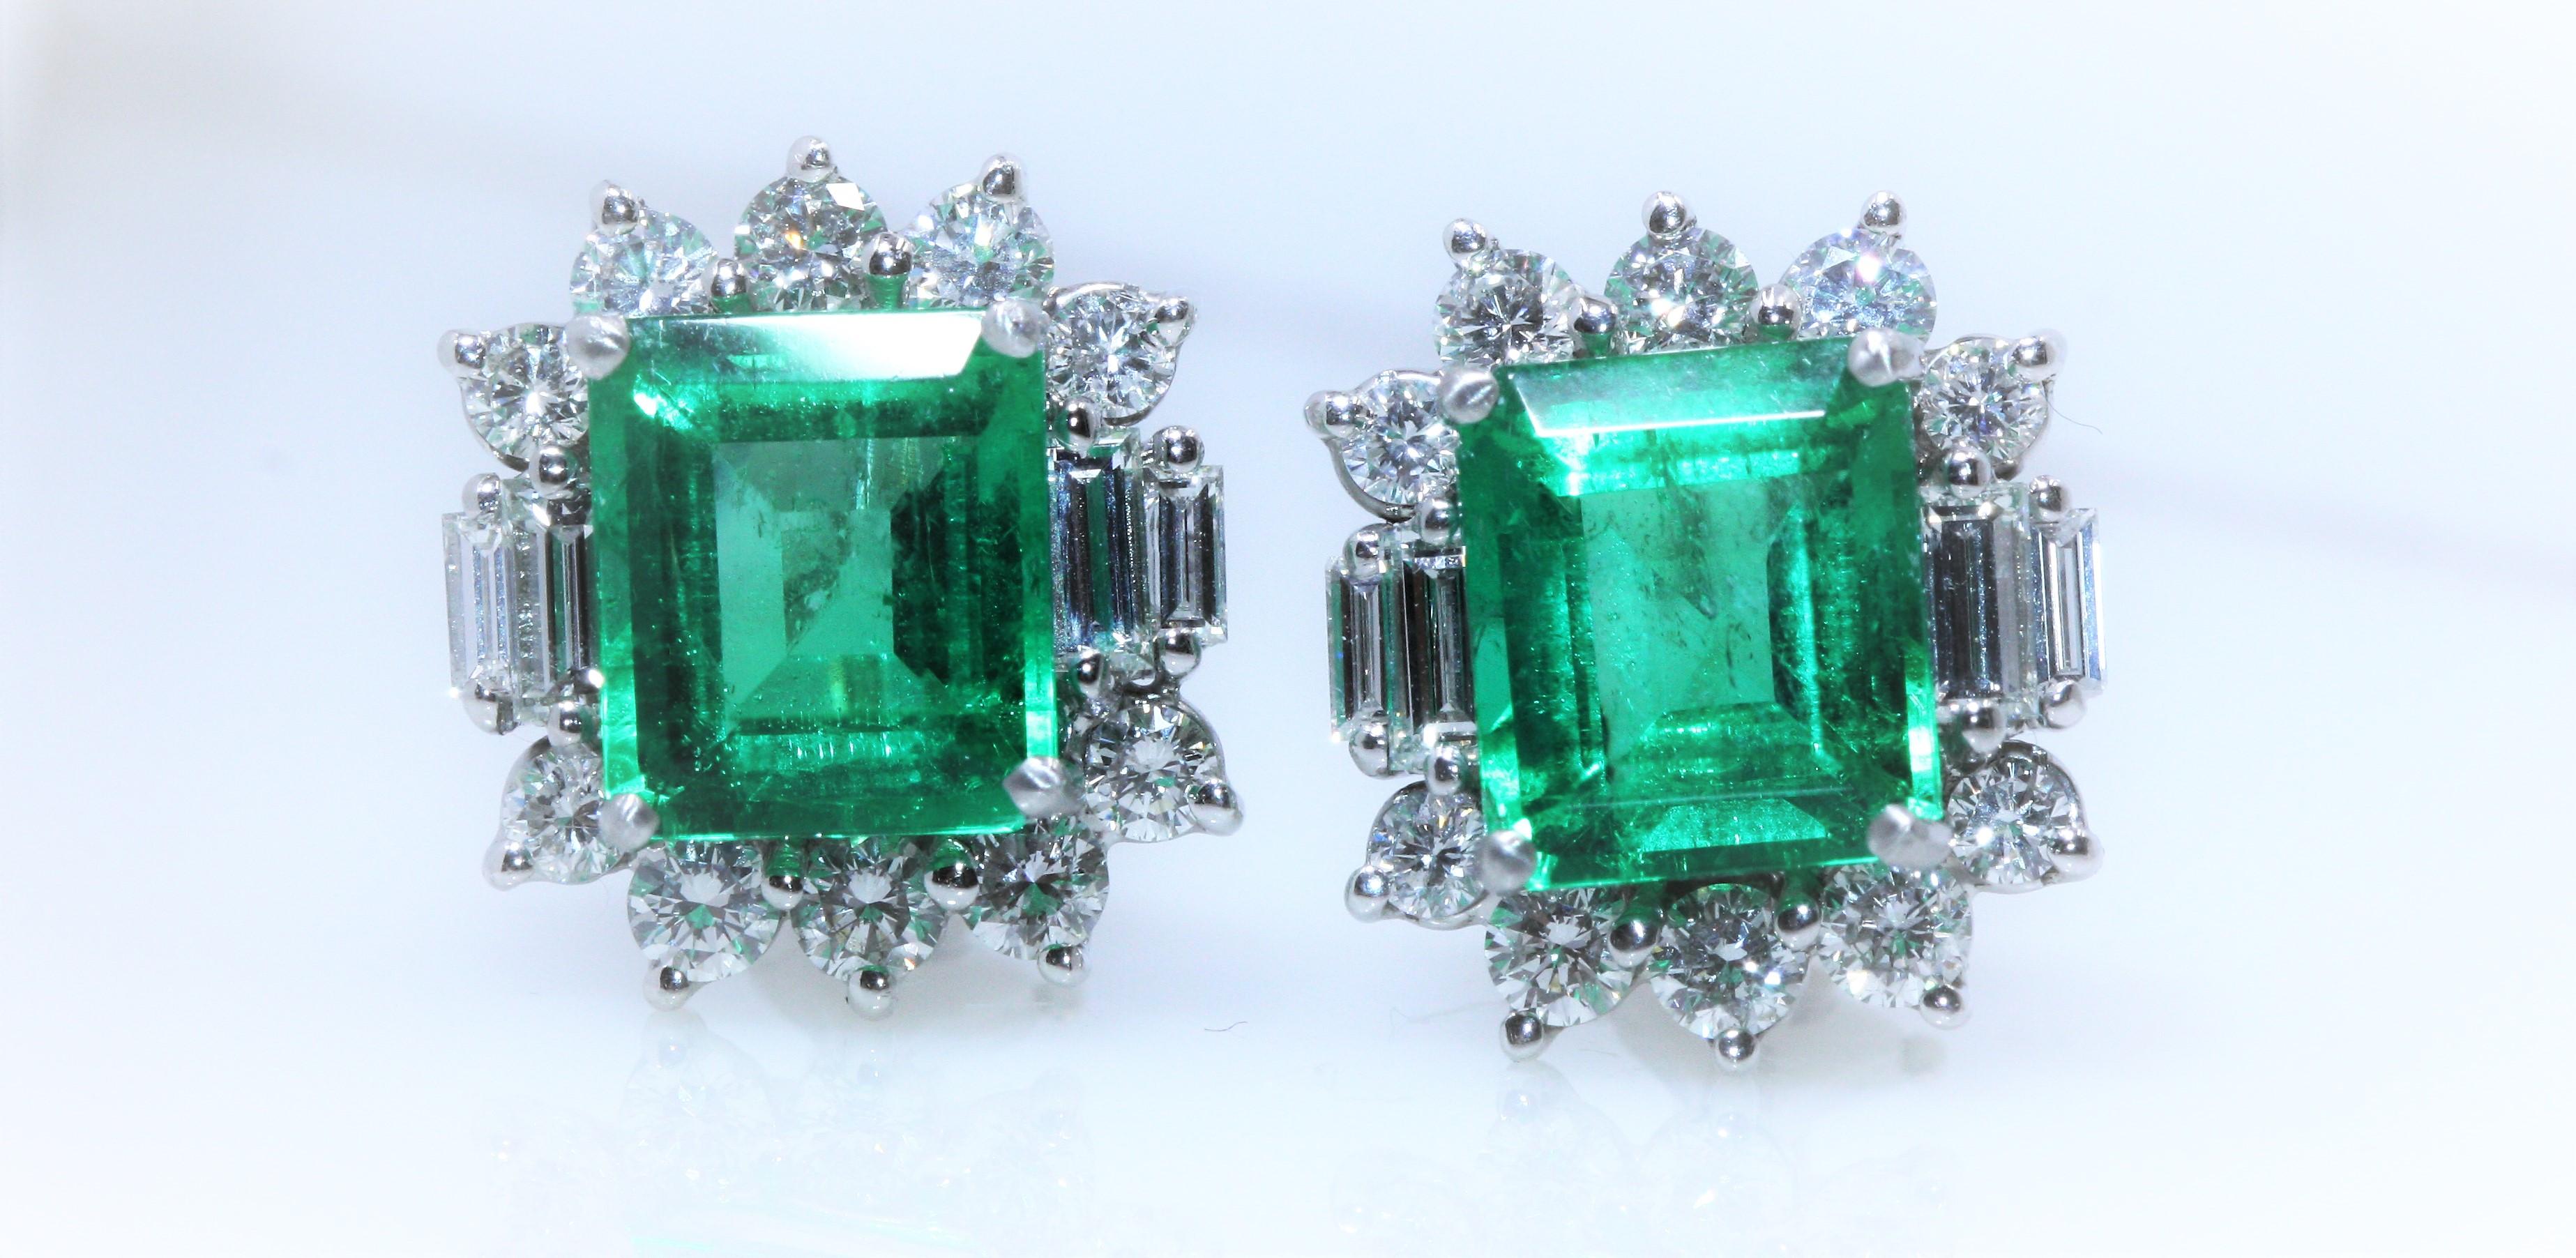 Columbia Emerald White Gold Diamond Earrings  insignificant oil
Comments: Two gemstones set in a pair of white metal earrings with several round and baguette diamonds.
Measurements: Approx. 9.30 x 8.06 x 5.53 and 9.27 x 8.04 x 5.31 mm
Shape: